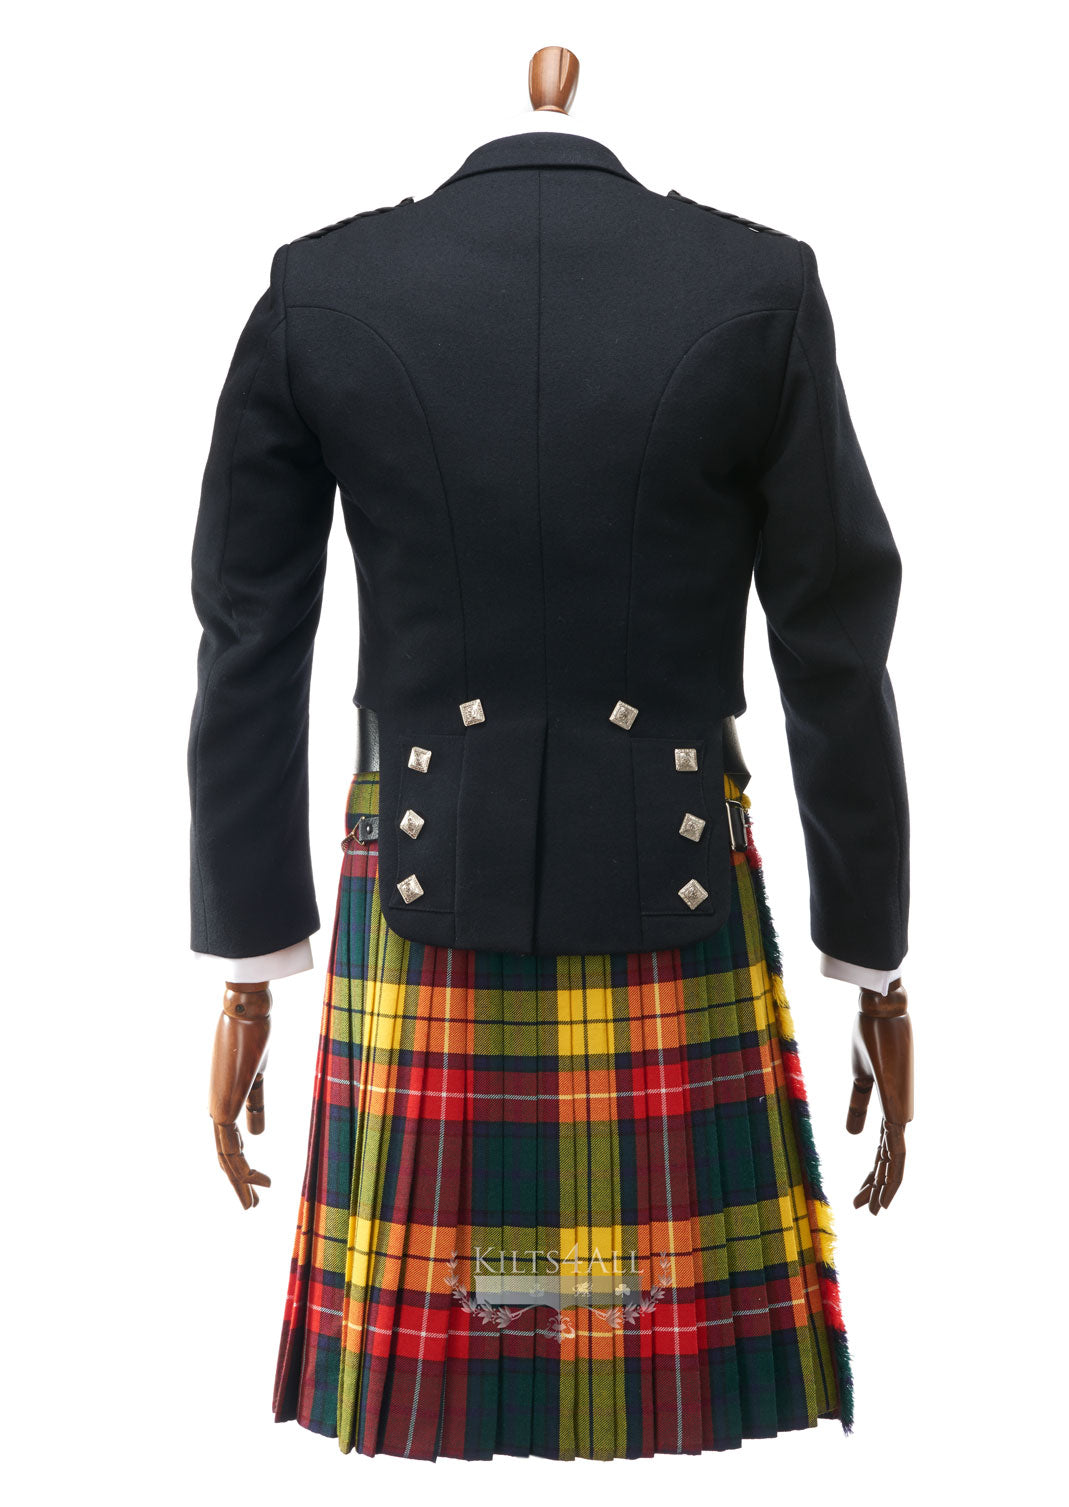 Mens Prince Charlie Jacket & 3 Button Waistcoat to Hire